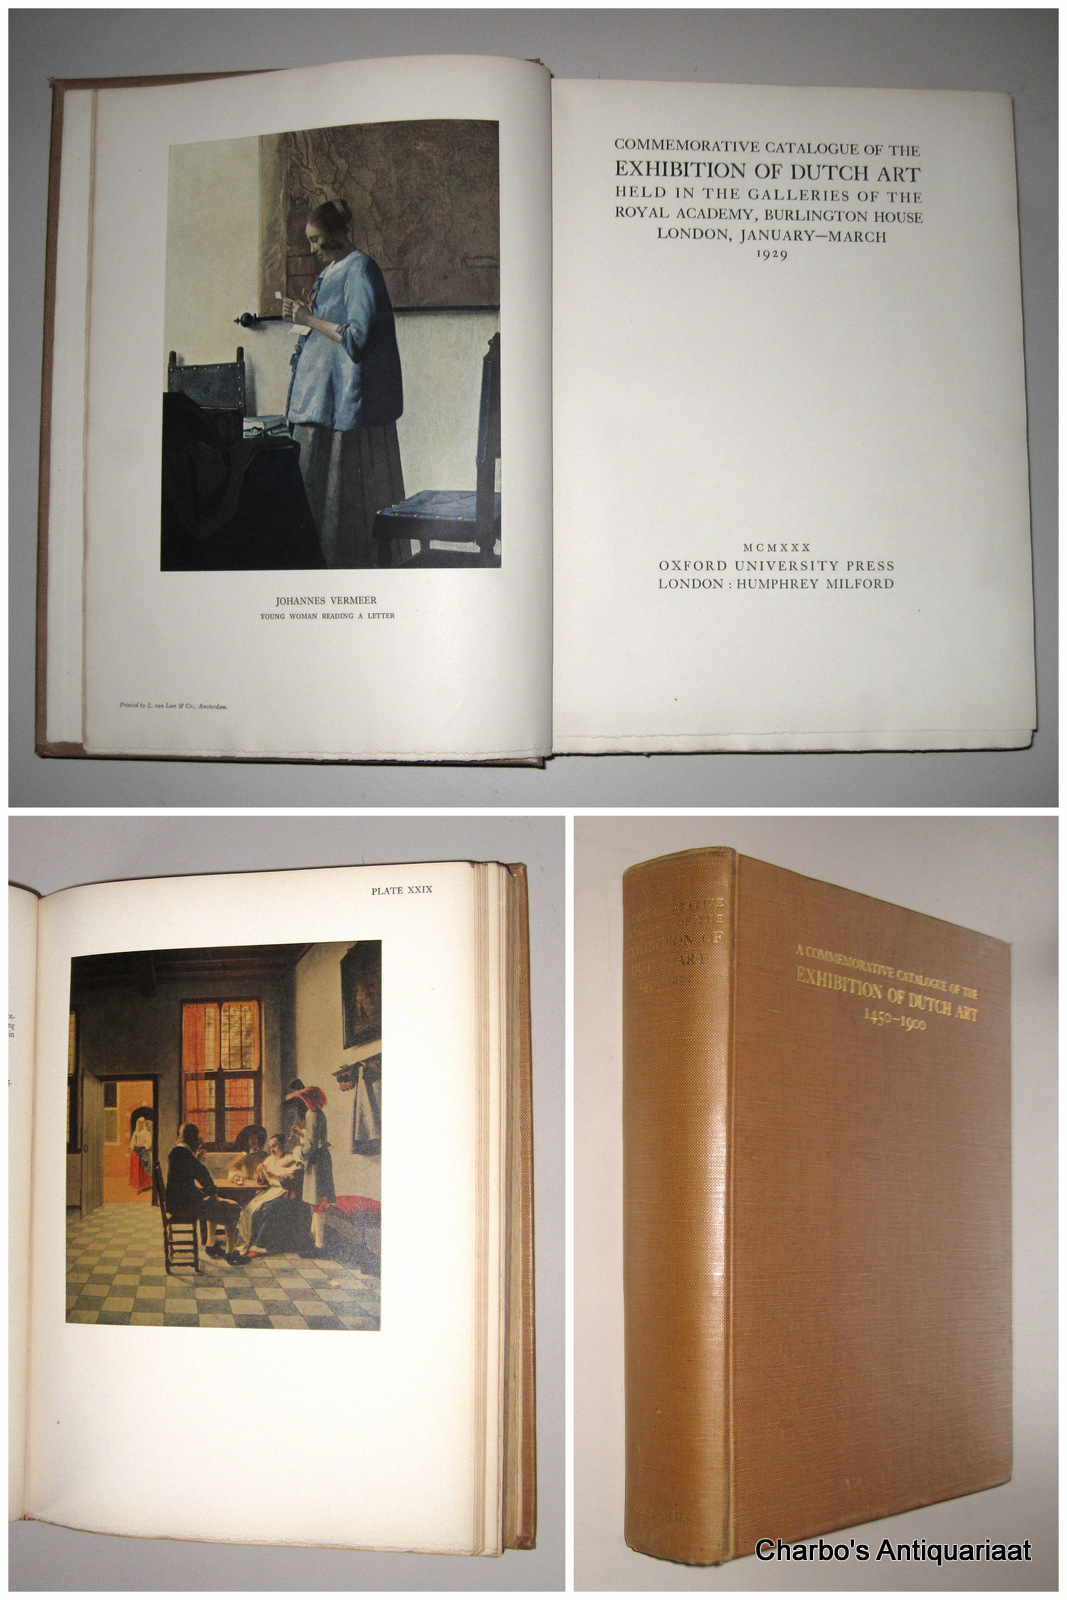 ROYAL ACADEMY, -  Commemorative catalogue of the exhibition of Dutch art held in the galleries of the Royal Academy, Burlington House, London,  January-March 1929. Intro by C.J. Holmes.